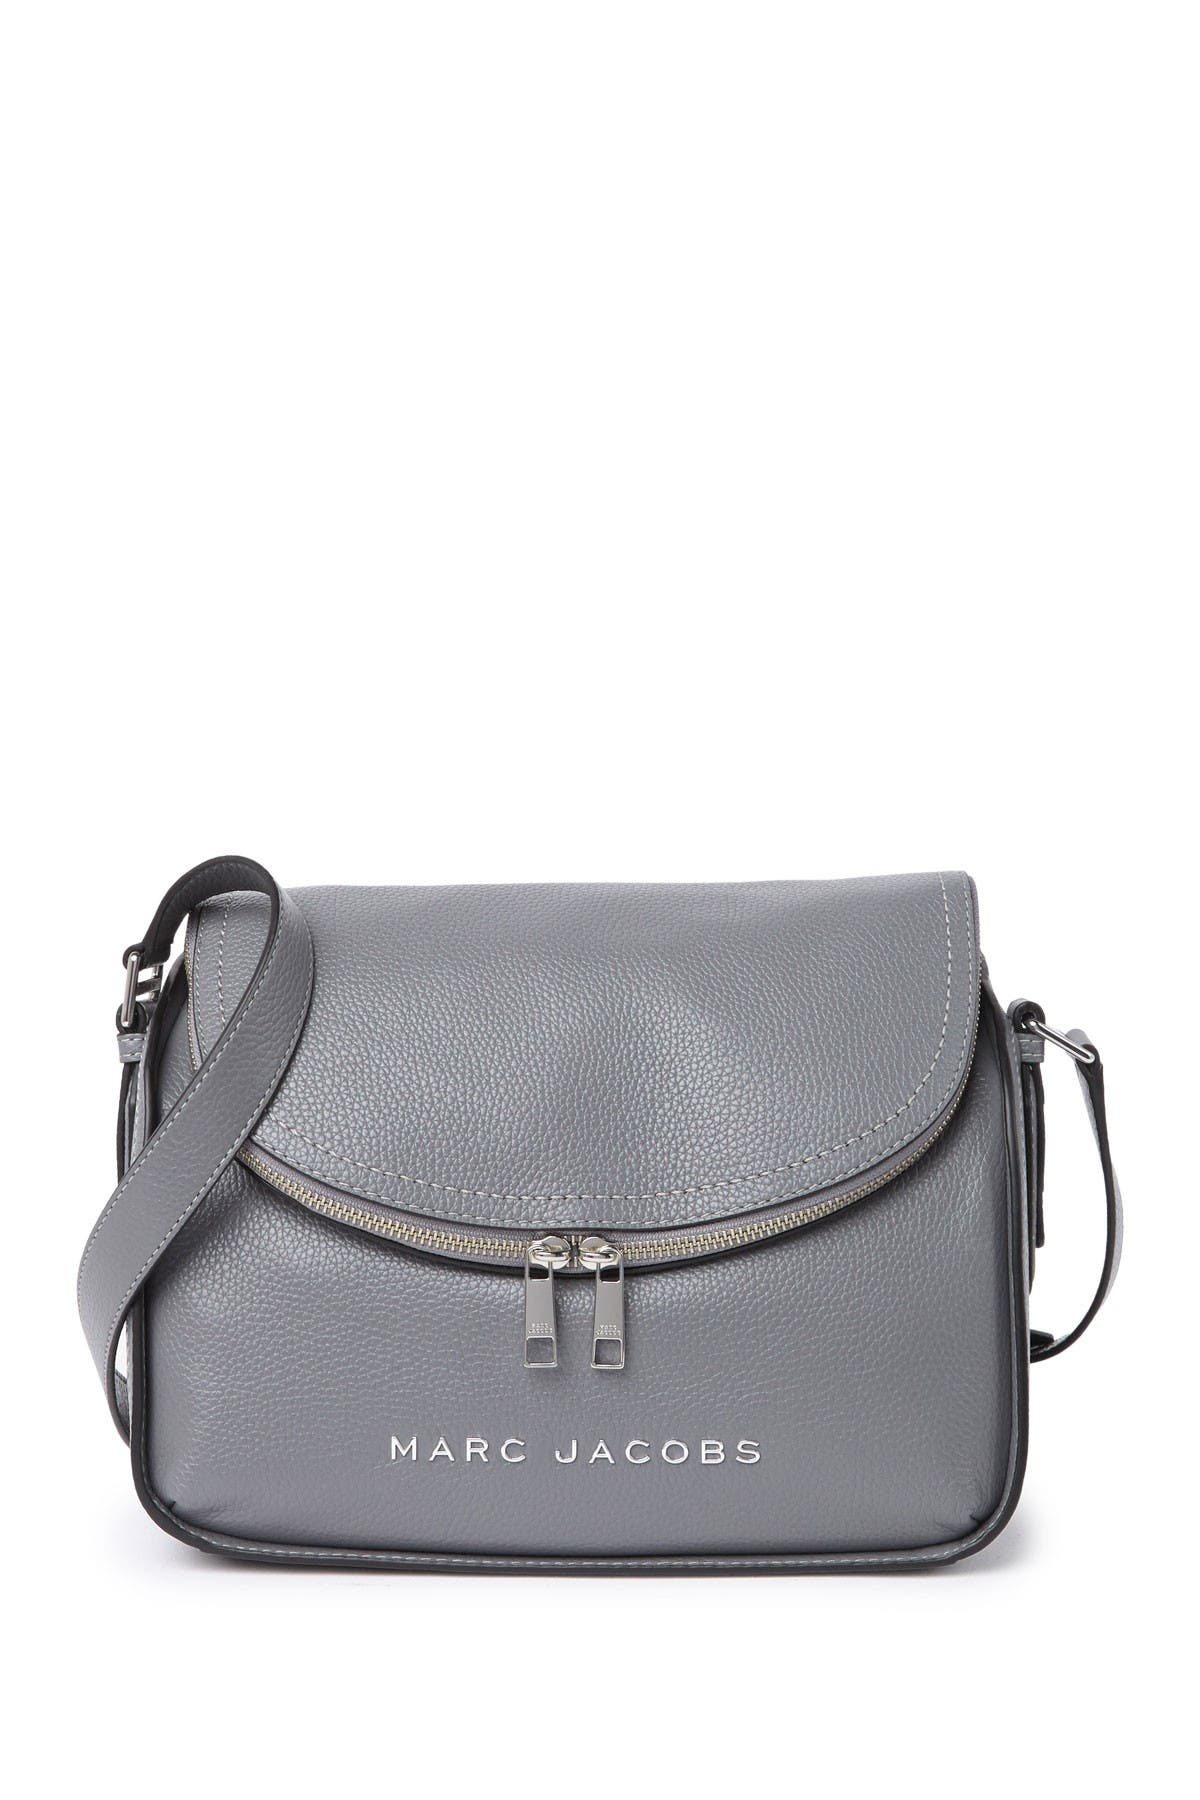 Marc Jacobs The Groove Leather Messenger Bag In Stormy Weather